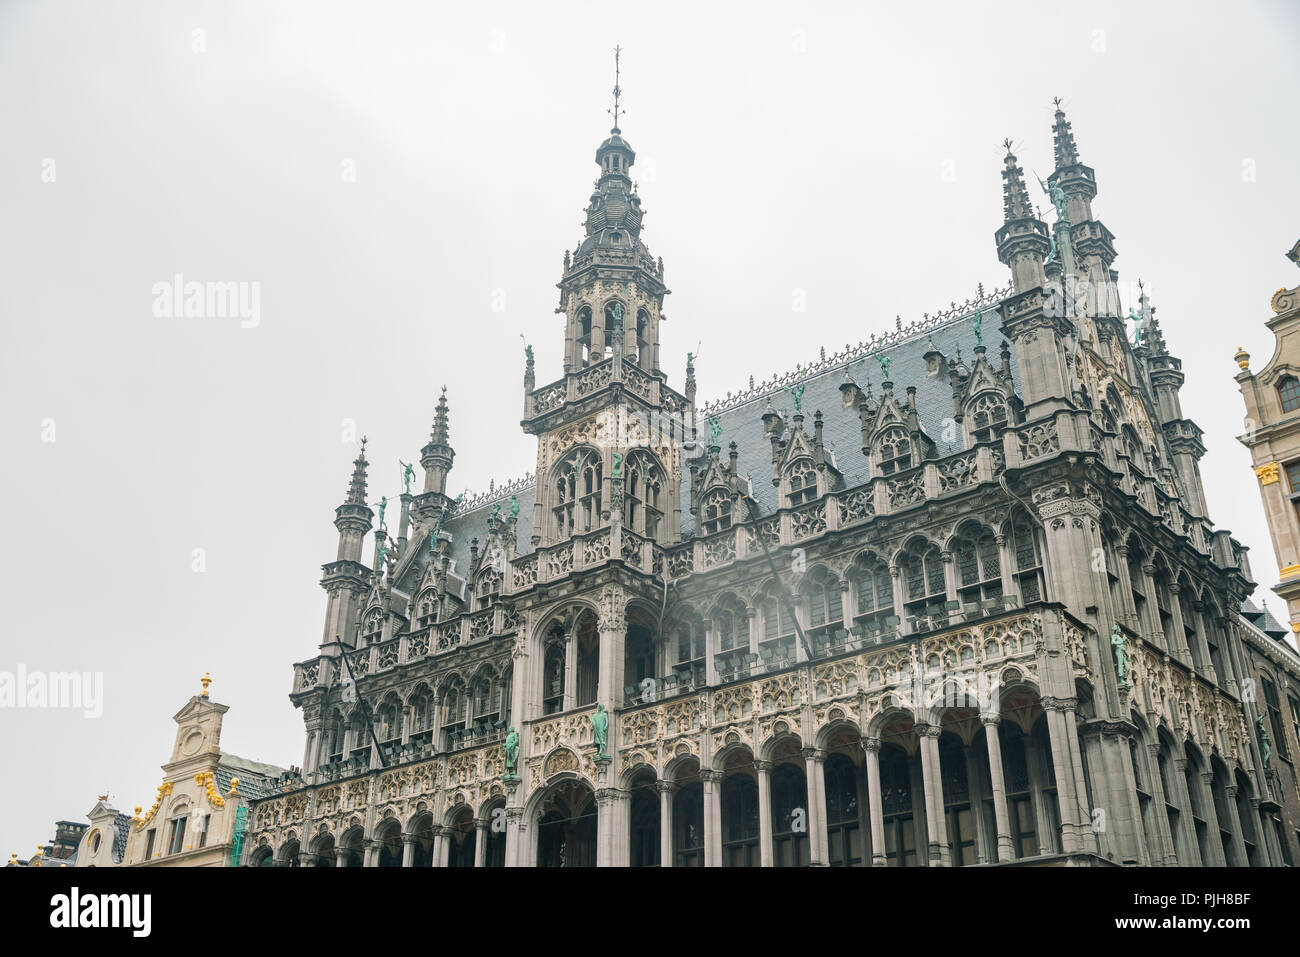 Exterior view of the Museum of the City of Brussels, Belgium Stock Photo